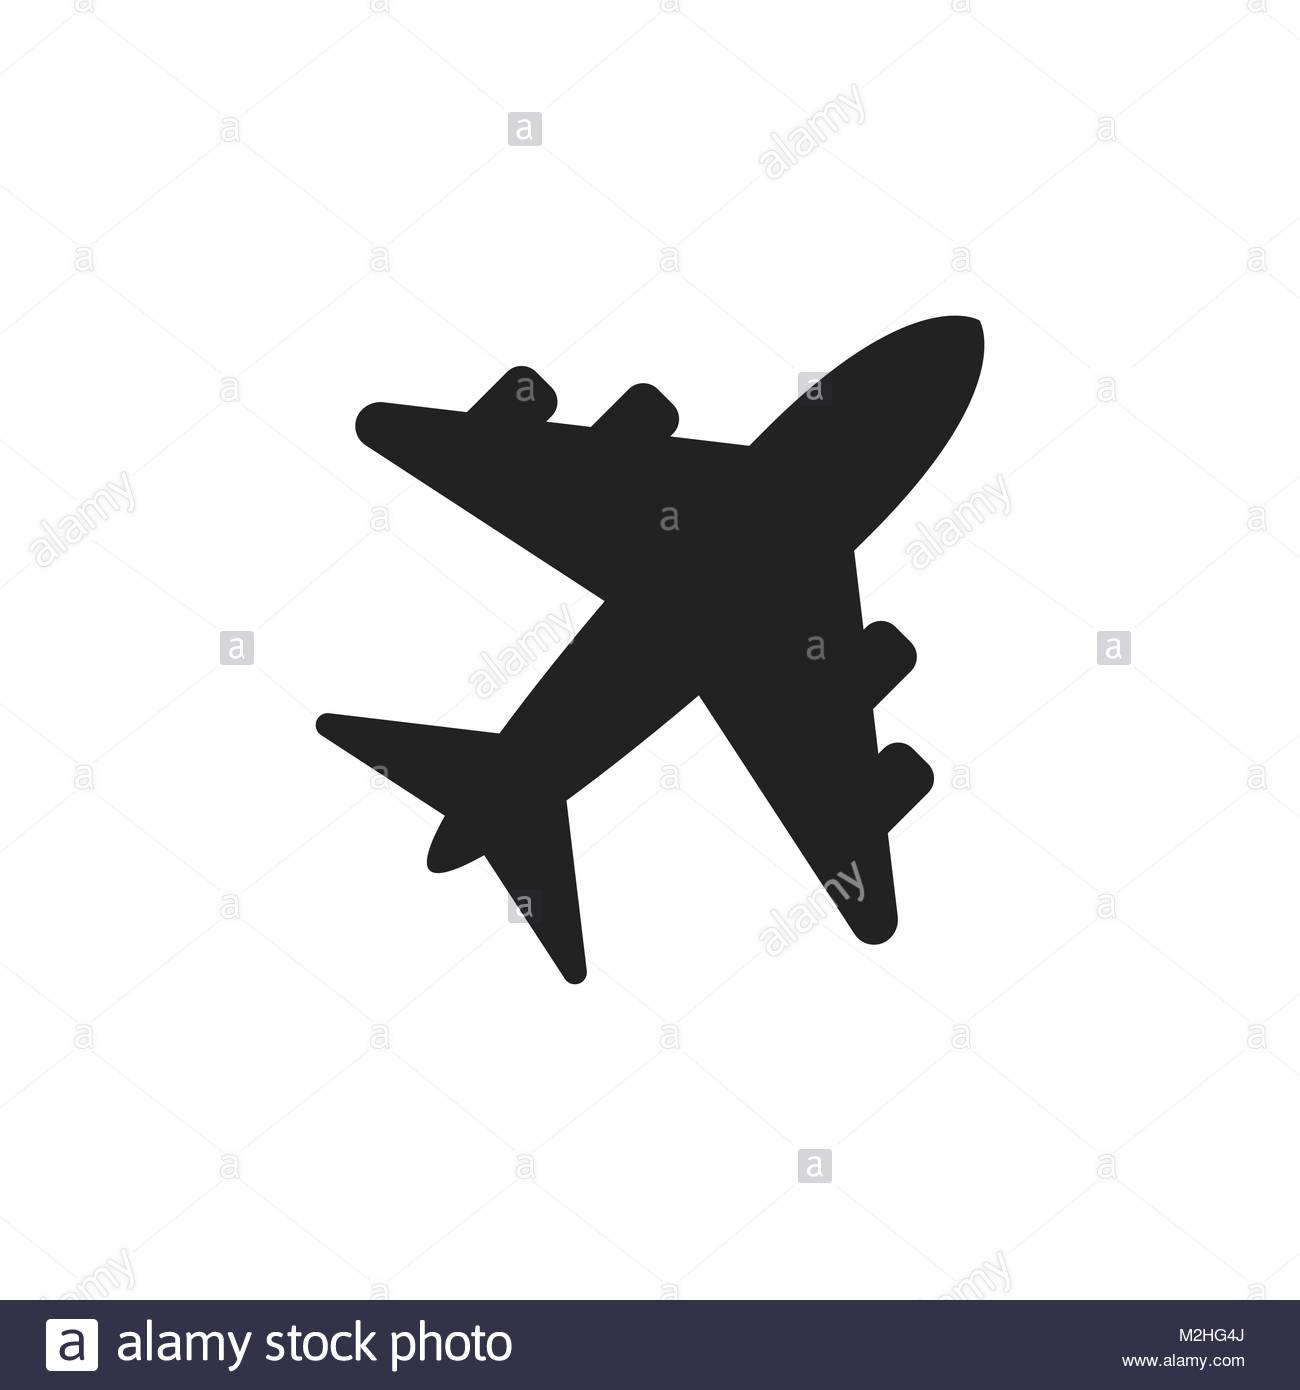 Free Vector Plane Icons - Download Free Vector Art, Stock Graphics 